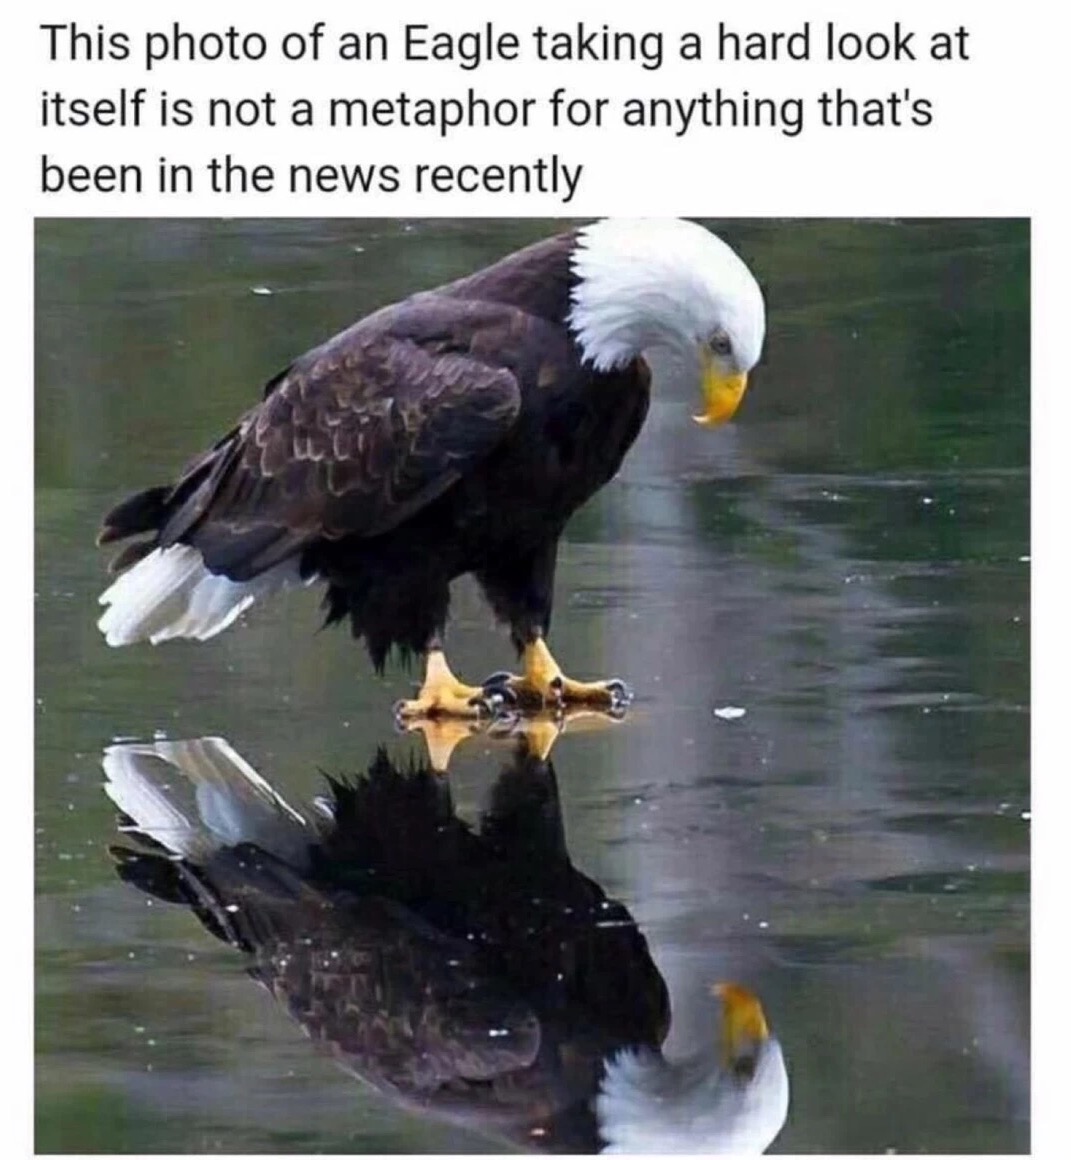 Eagle staring at its own reflection that is not a metaphor for anything.